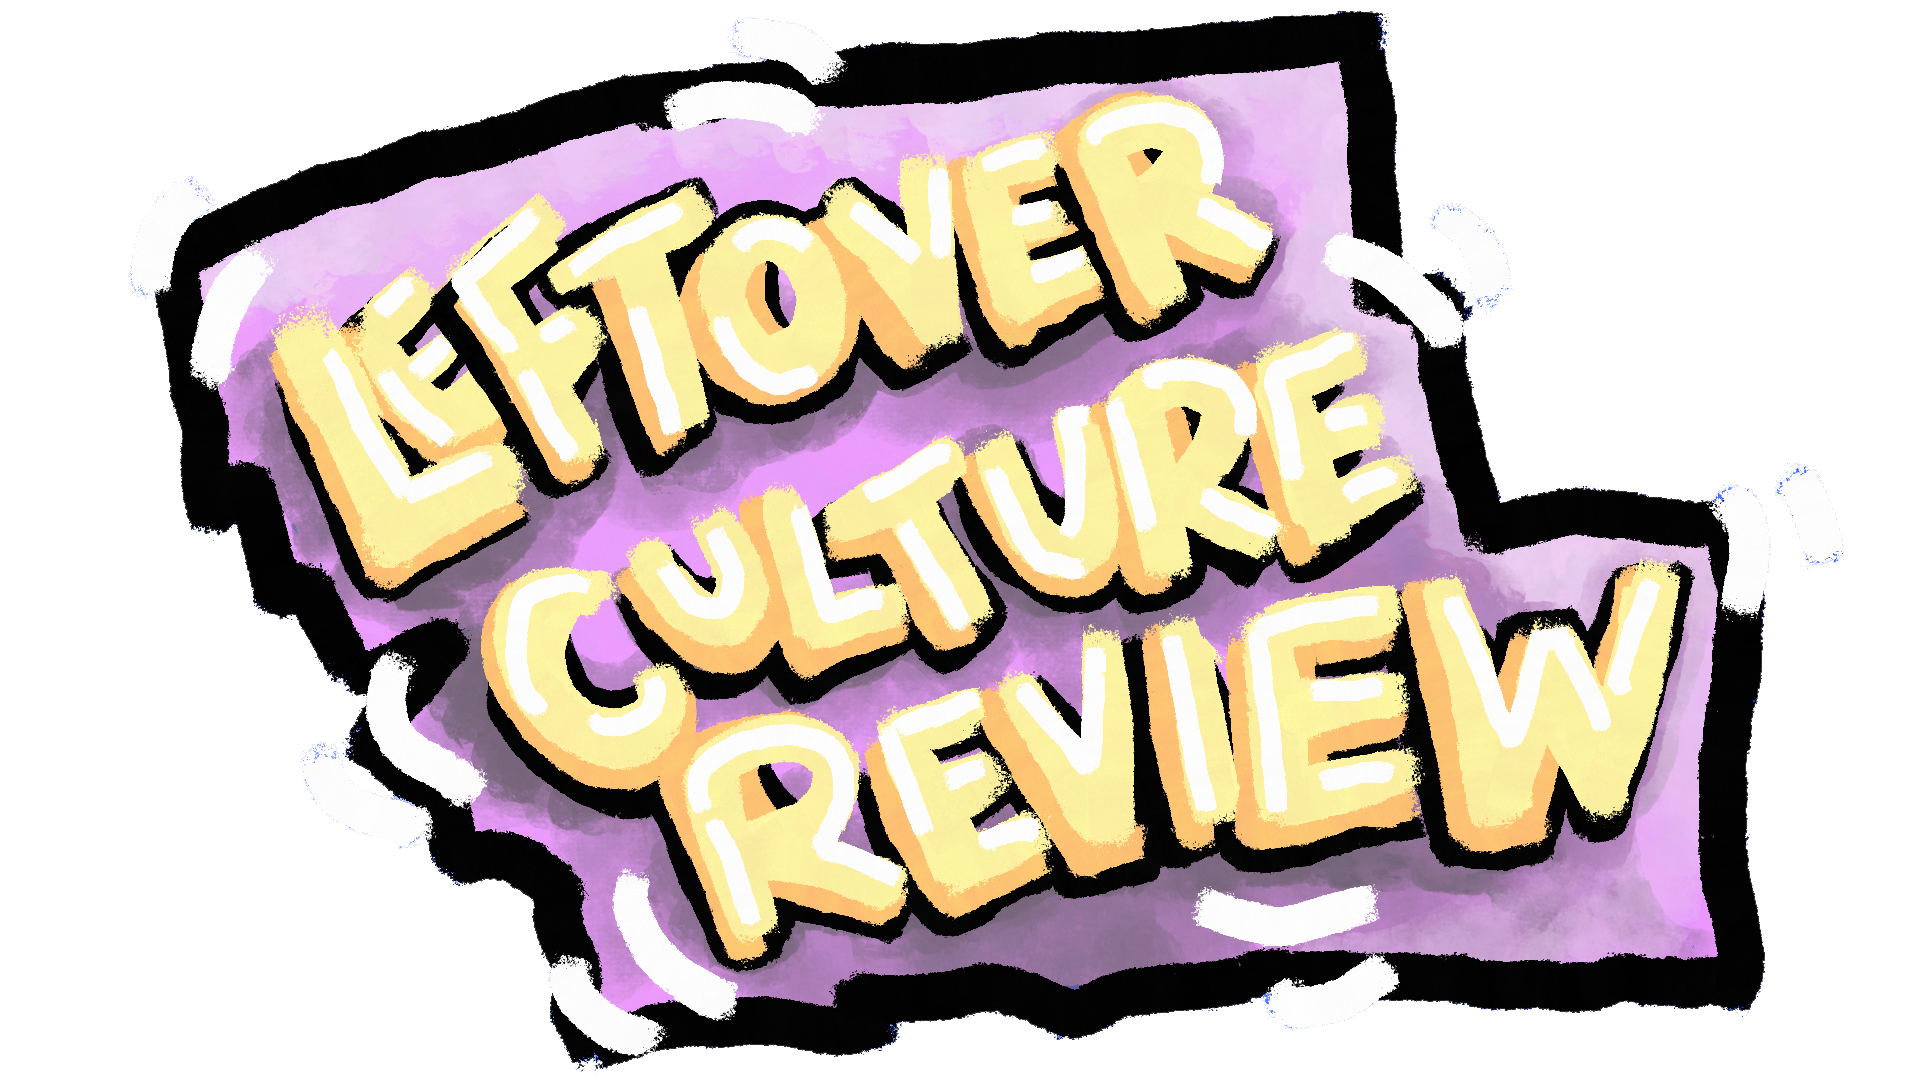 Leftover Culture Review